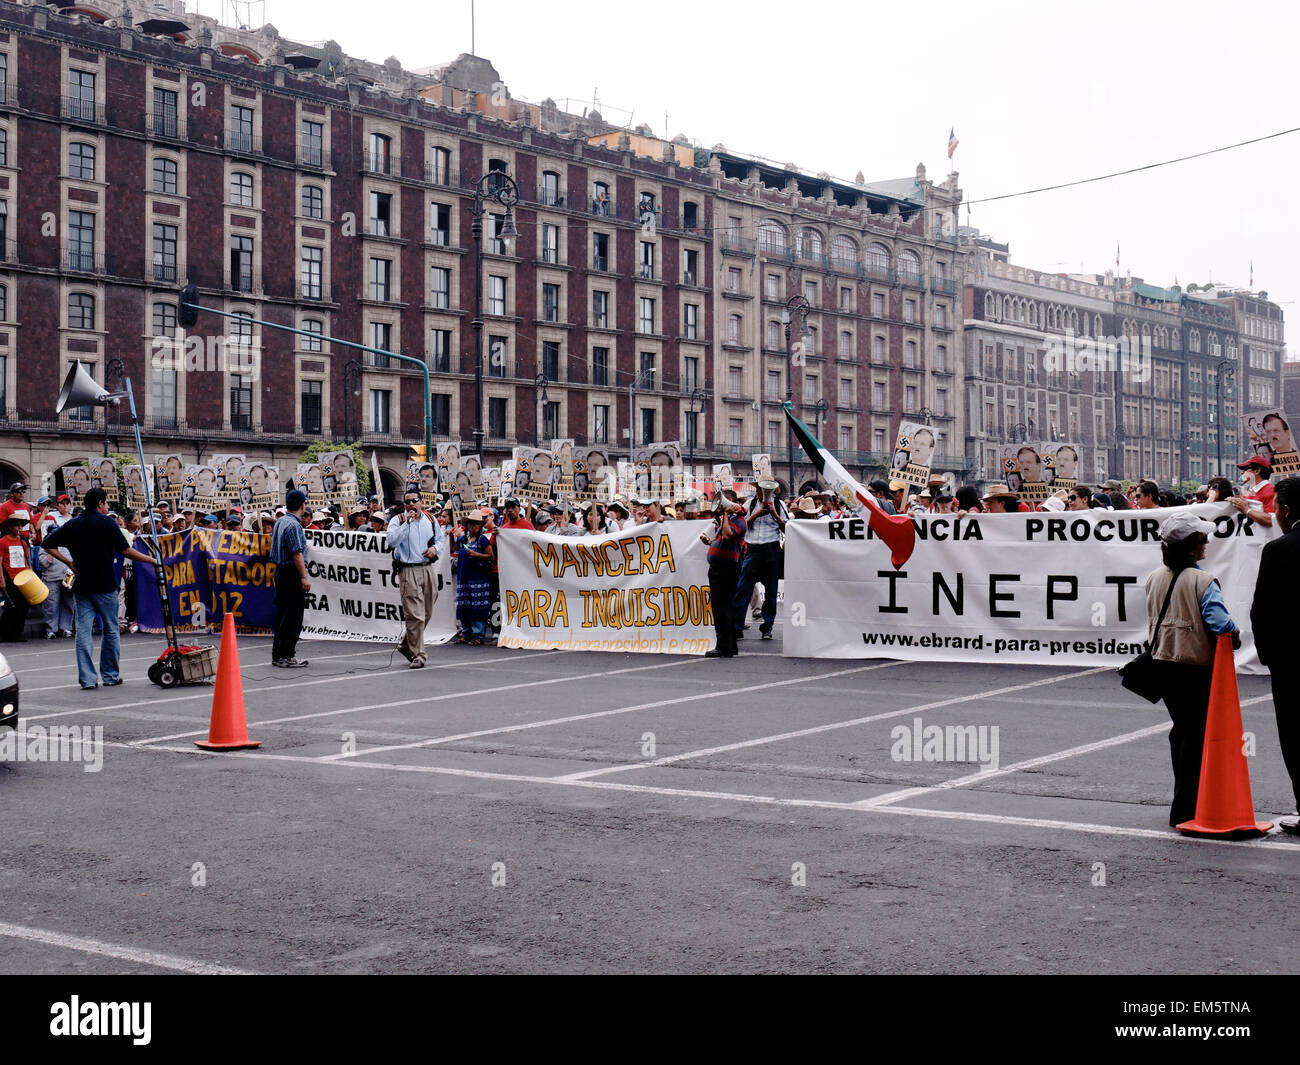 Protest and protesters in the Zocalo, Mexico City, during a demonstration Stock Photo